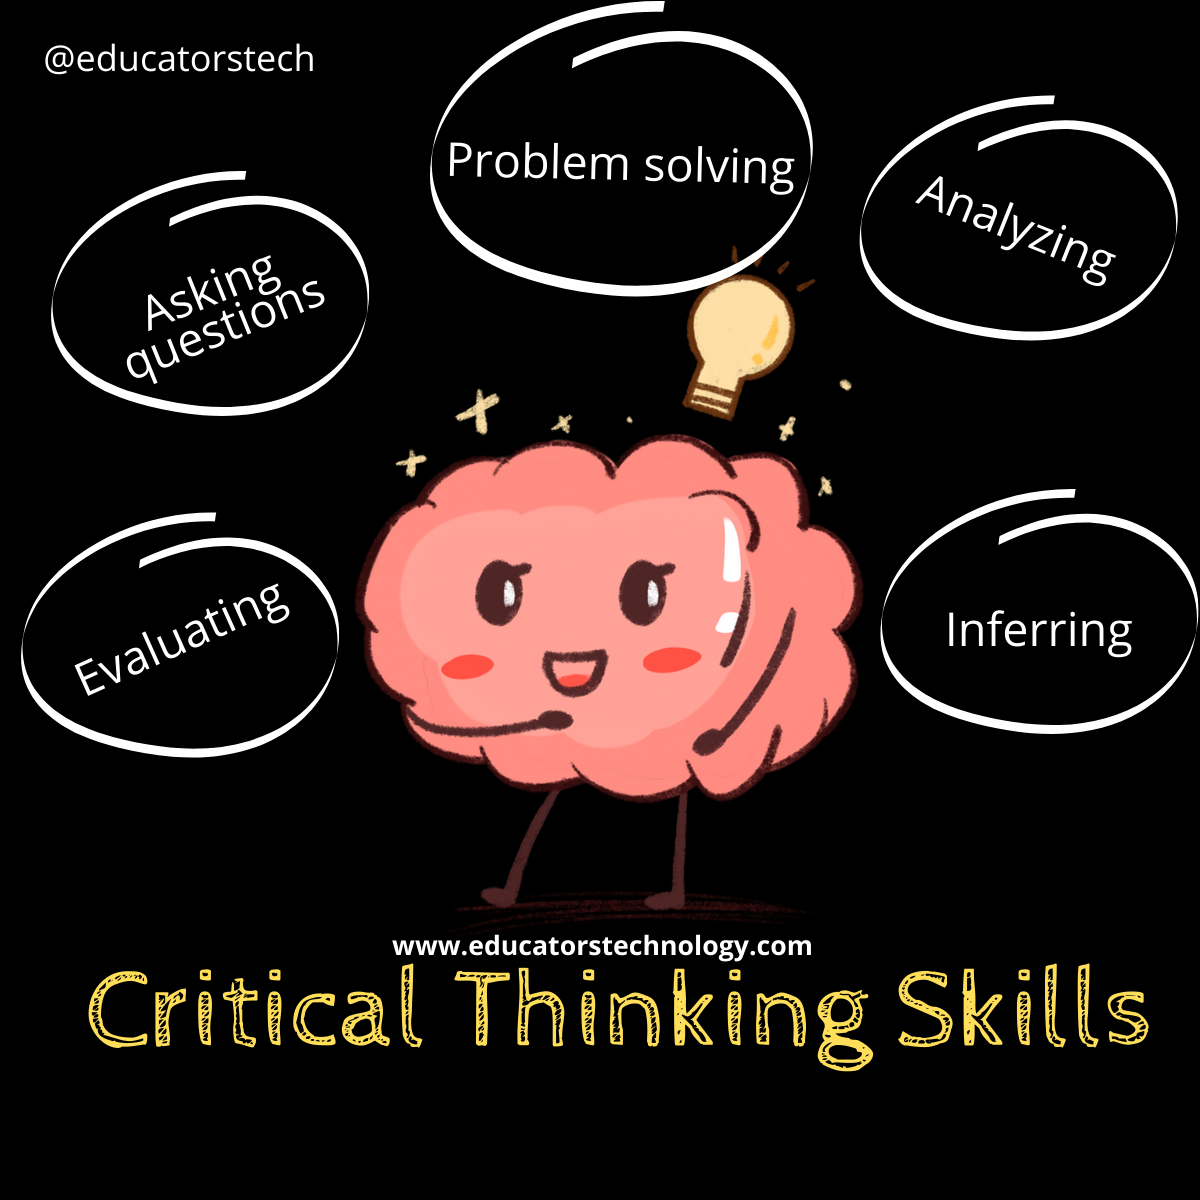 often overlooked component of critical thinking